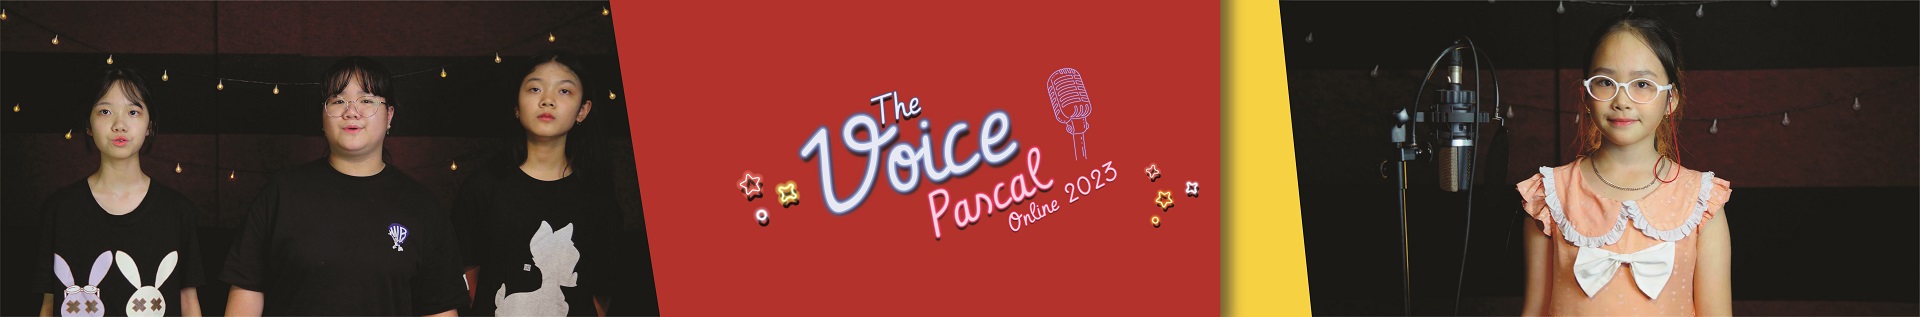 The Voice Pascal Online